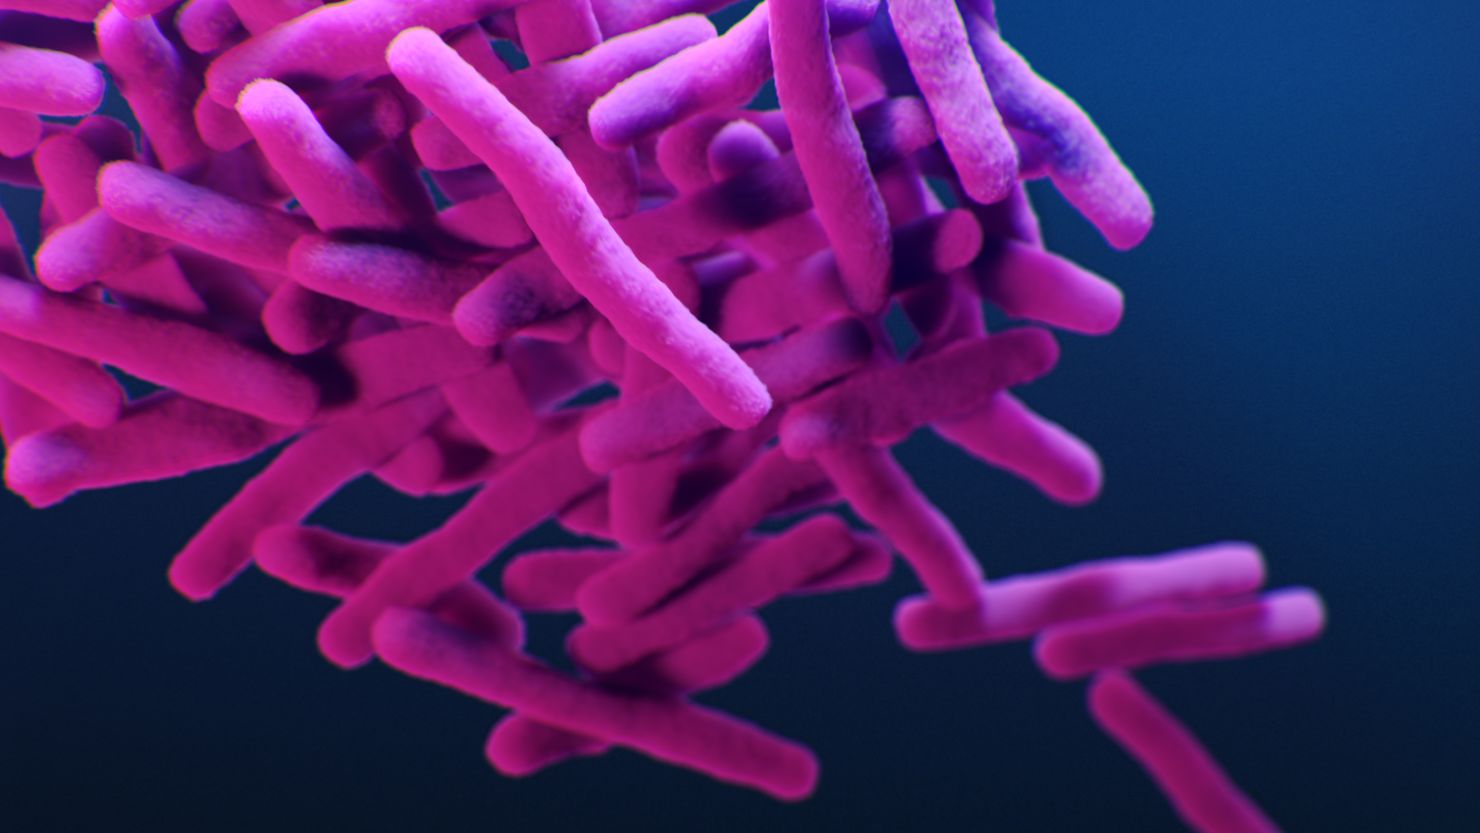 This is a medical illustration of drug-resistant, Mycobacterium tuberculosis bacteria, which cause tuberculosis. 